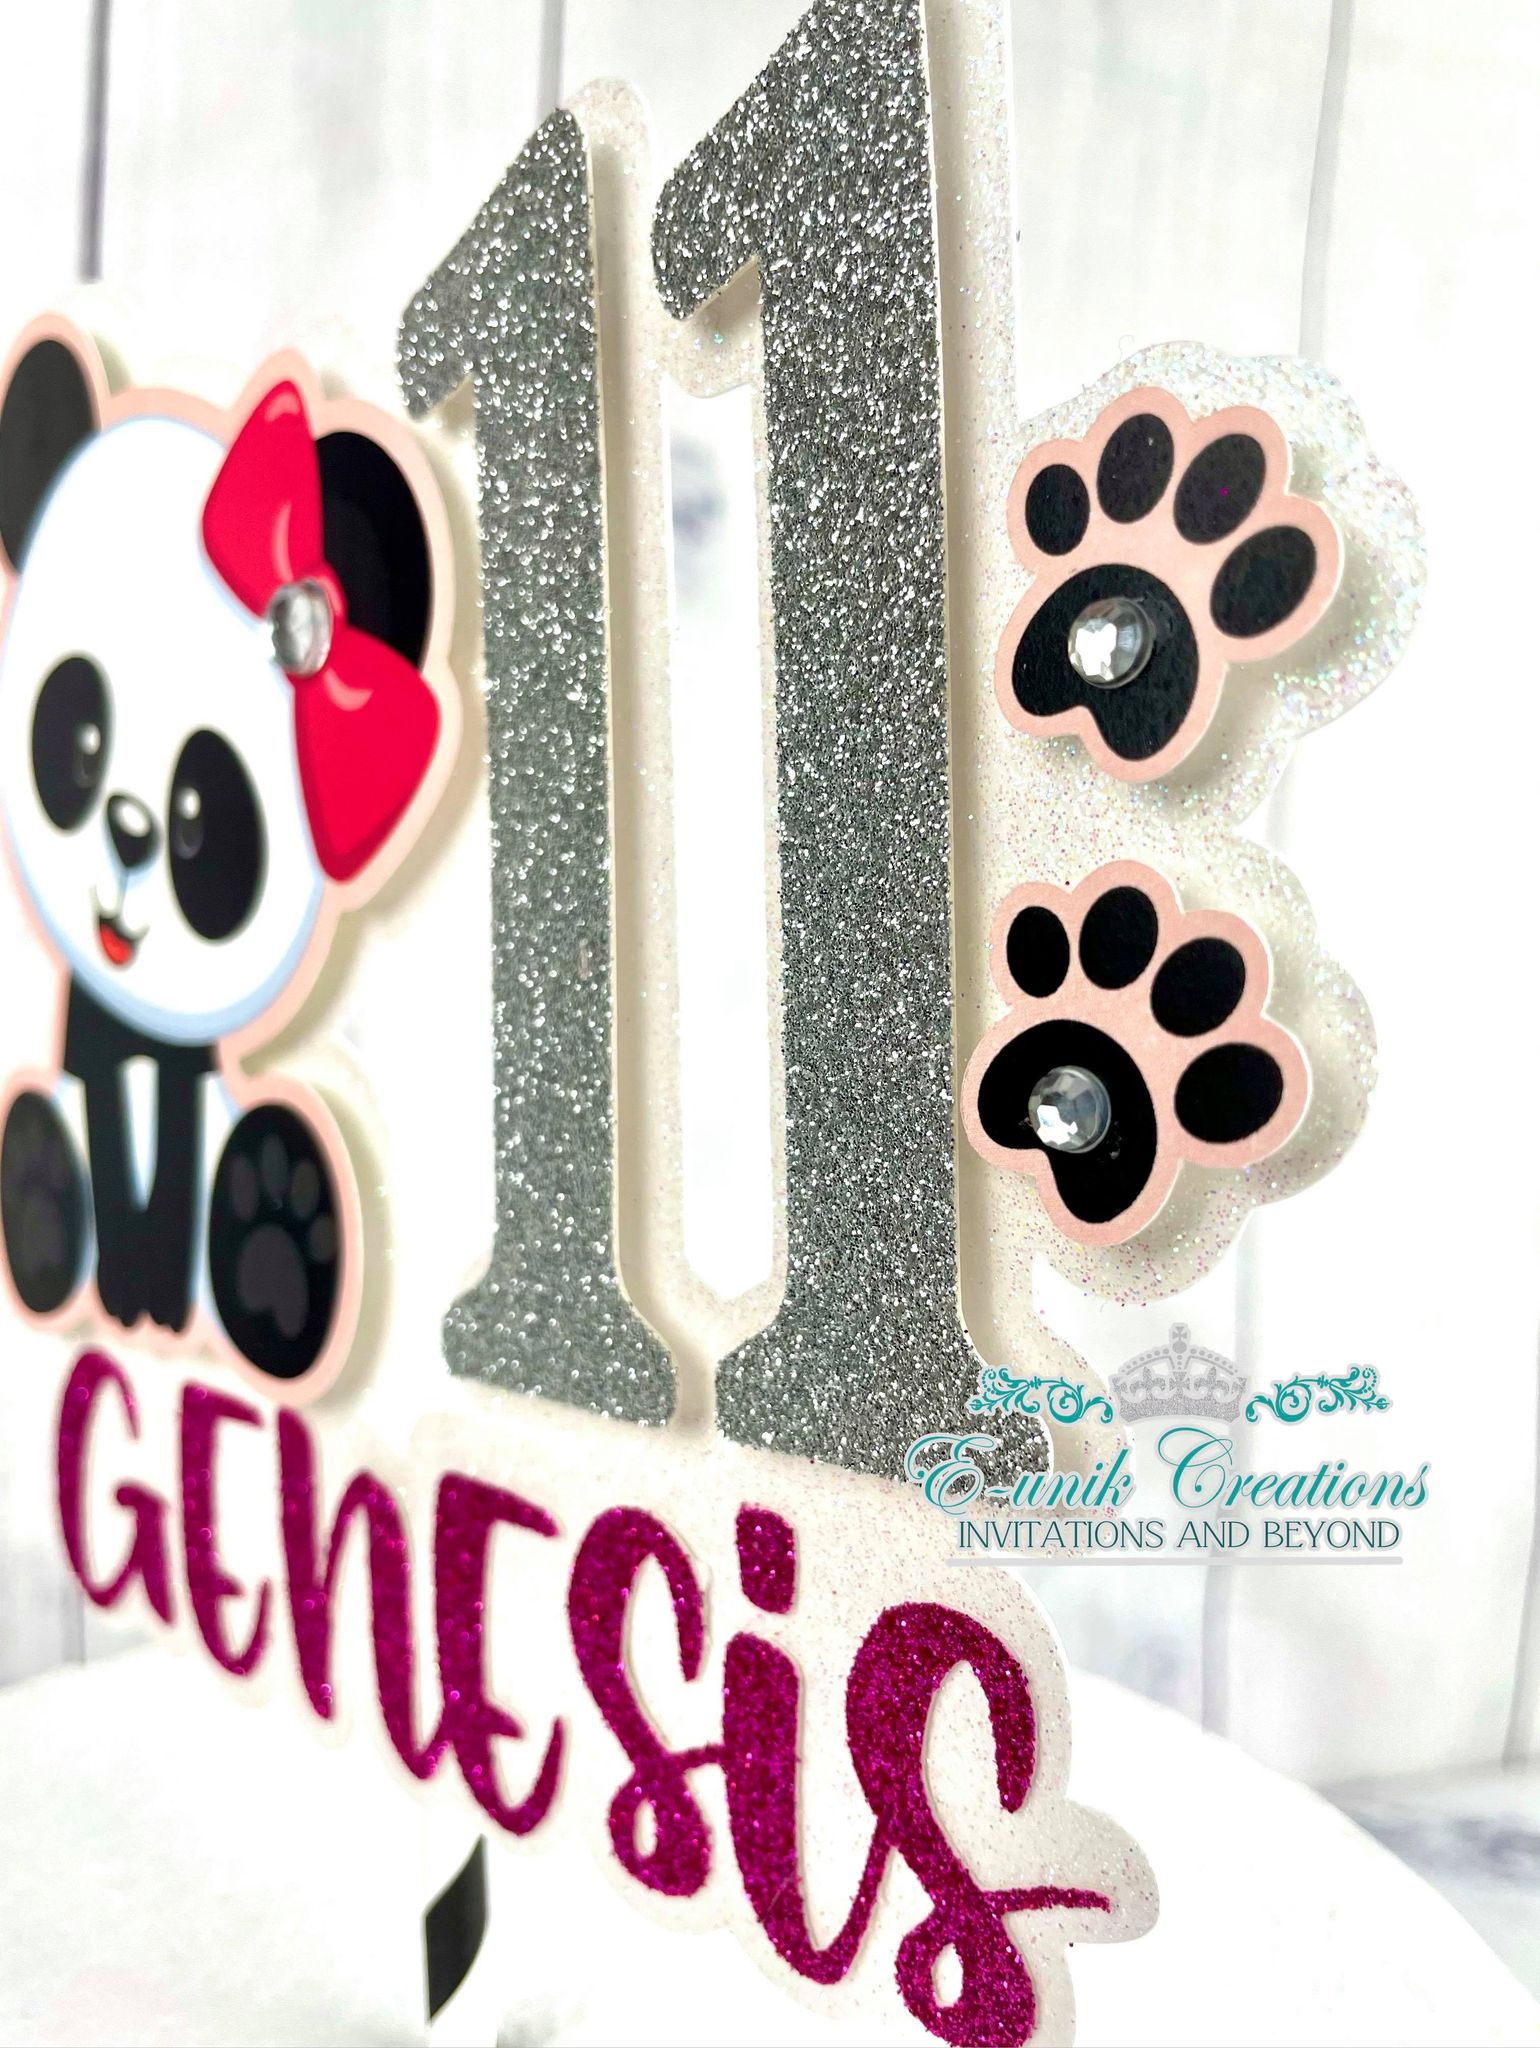 Adorable Panda Cake Topper Double Sided Glitter Happy Birthday Party  Decoration Baby Shower Party Decor Supplies (1PCS Panda cake topper) :  Amazon.com.au: Pantry Food & Drinks